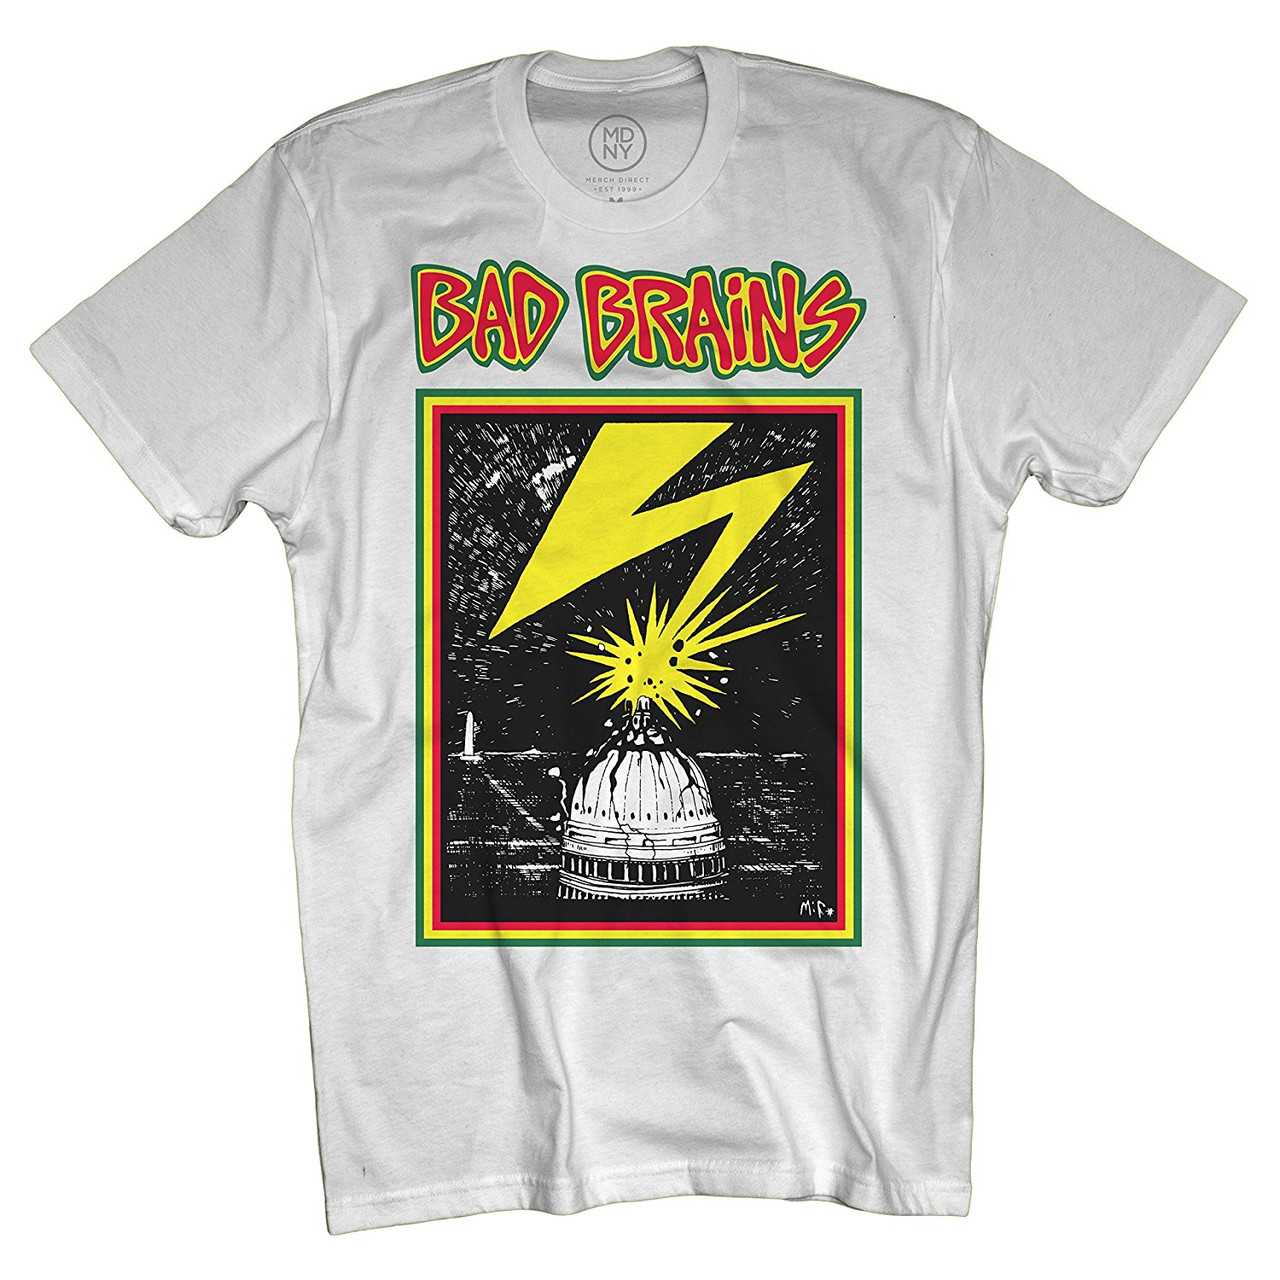 BAD BRAINS - Capitol LOGO T-SHIRT black *** ALL SIZES AVAILABLE *** –  Radiation Records